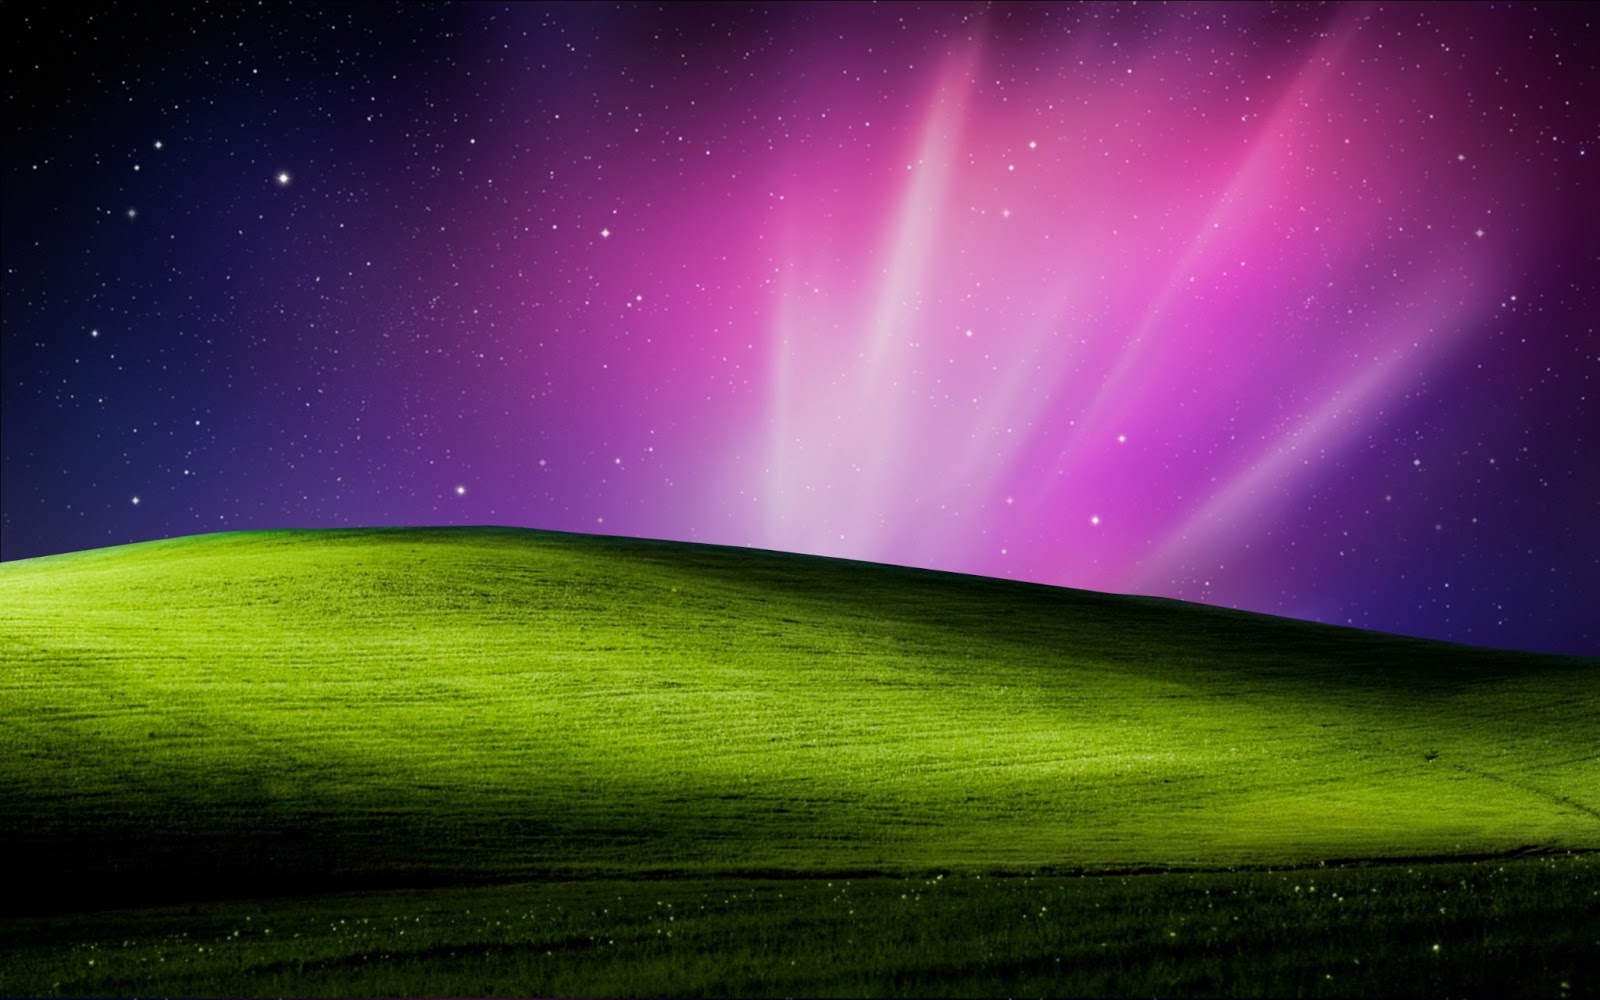 Apple Os X HD Wallpaper 99share In